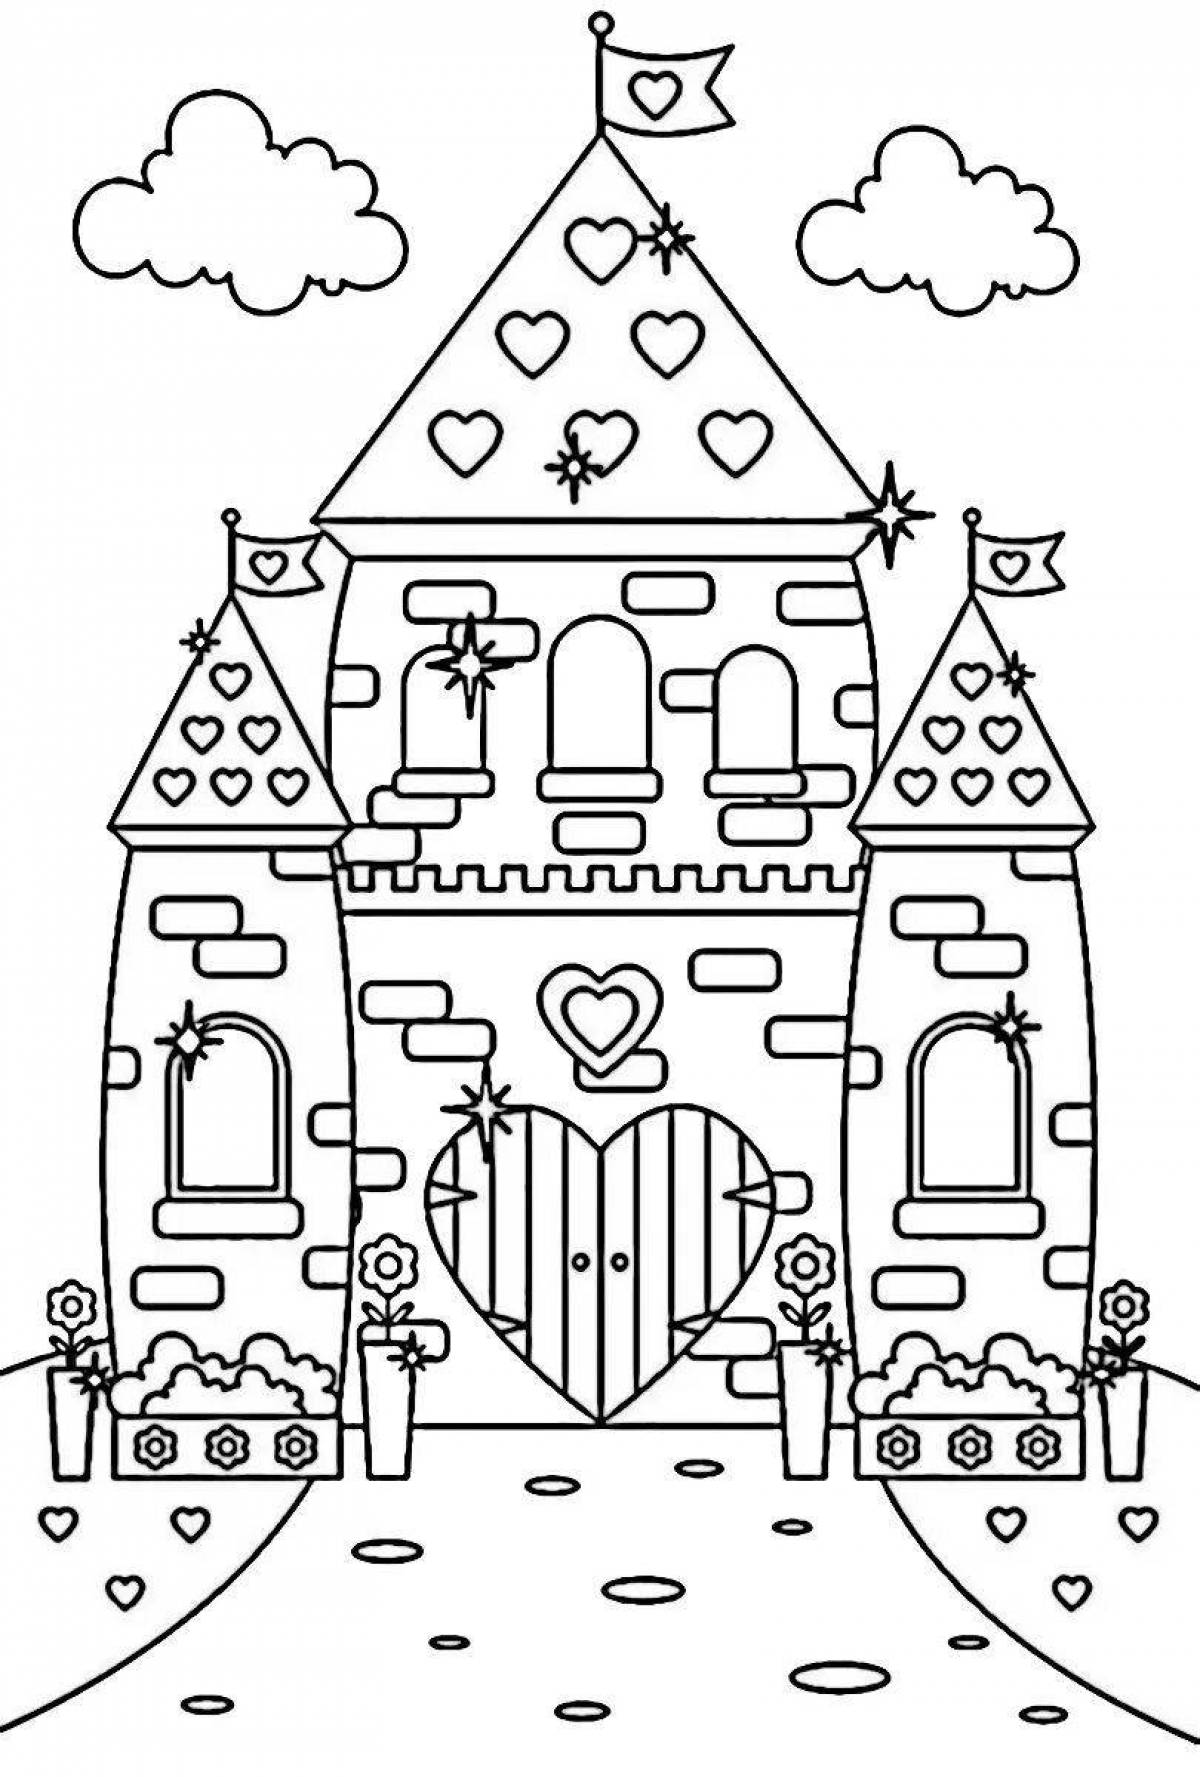 Shiny coloring book for girls princess castle